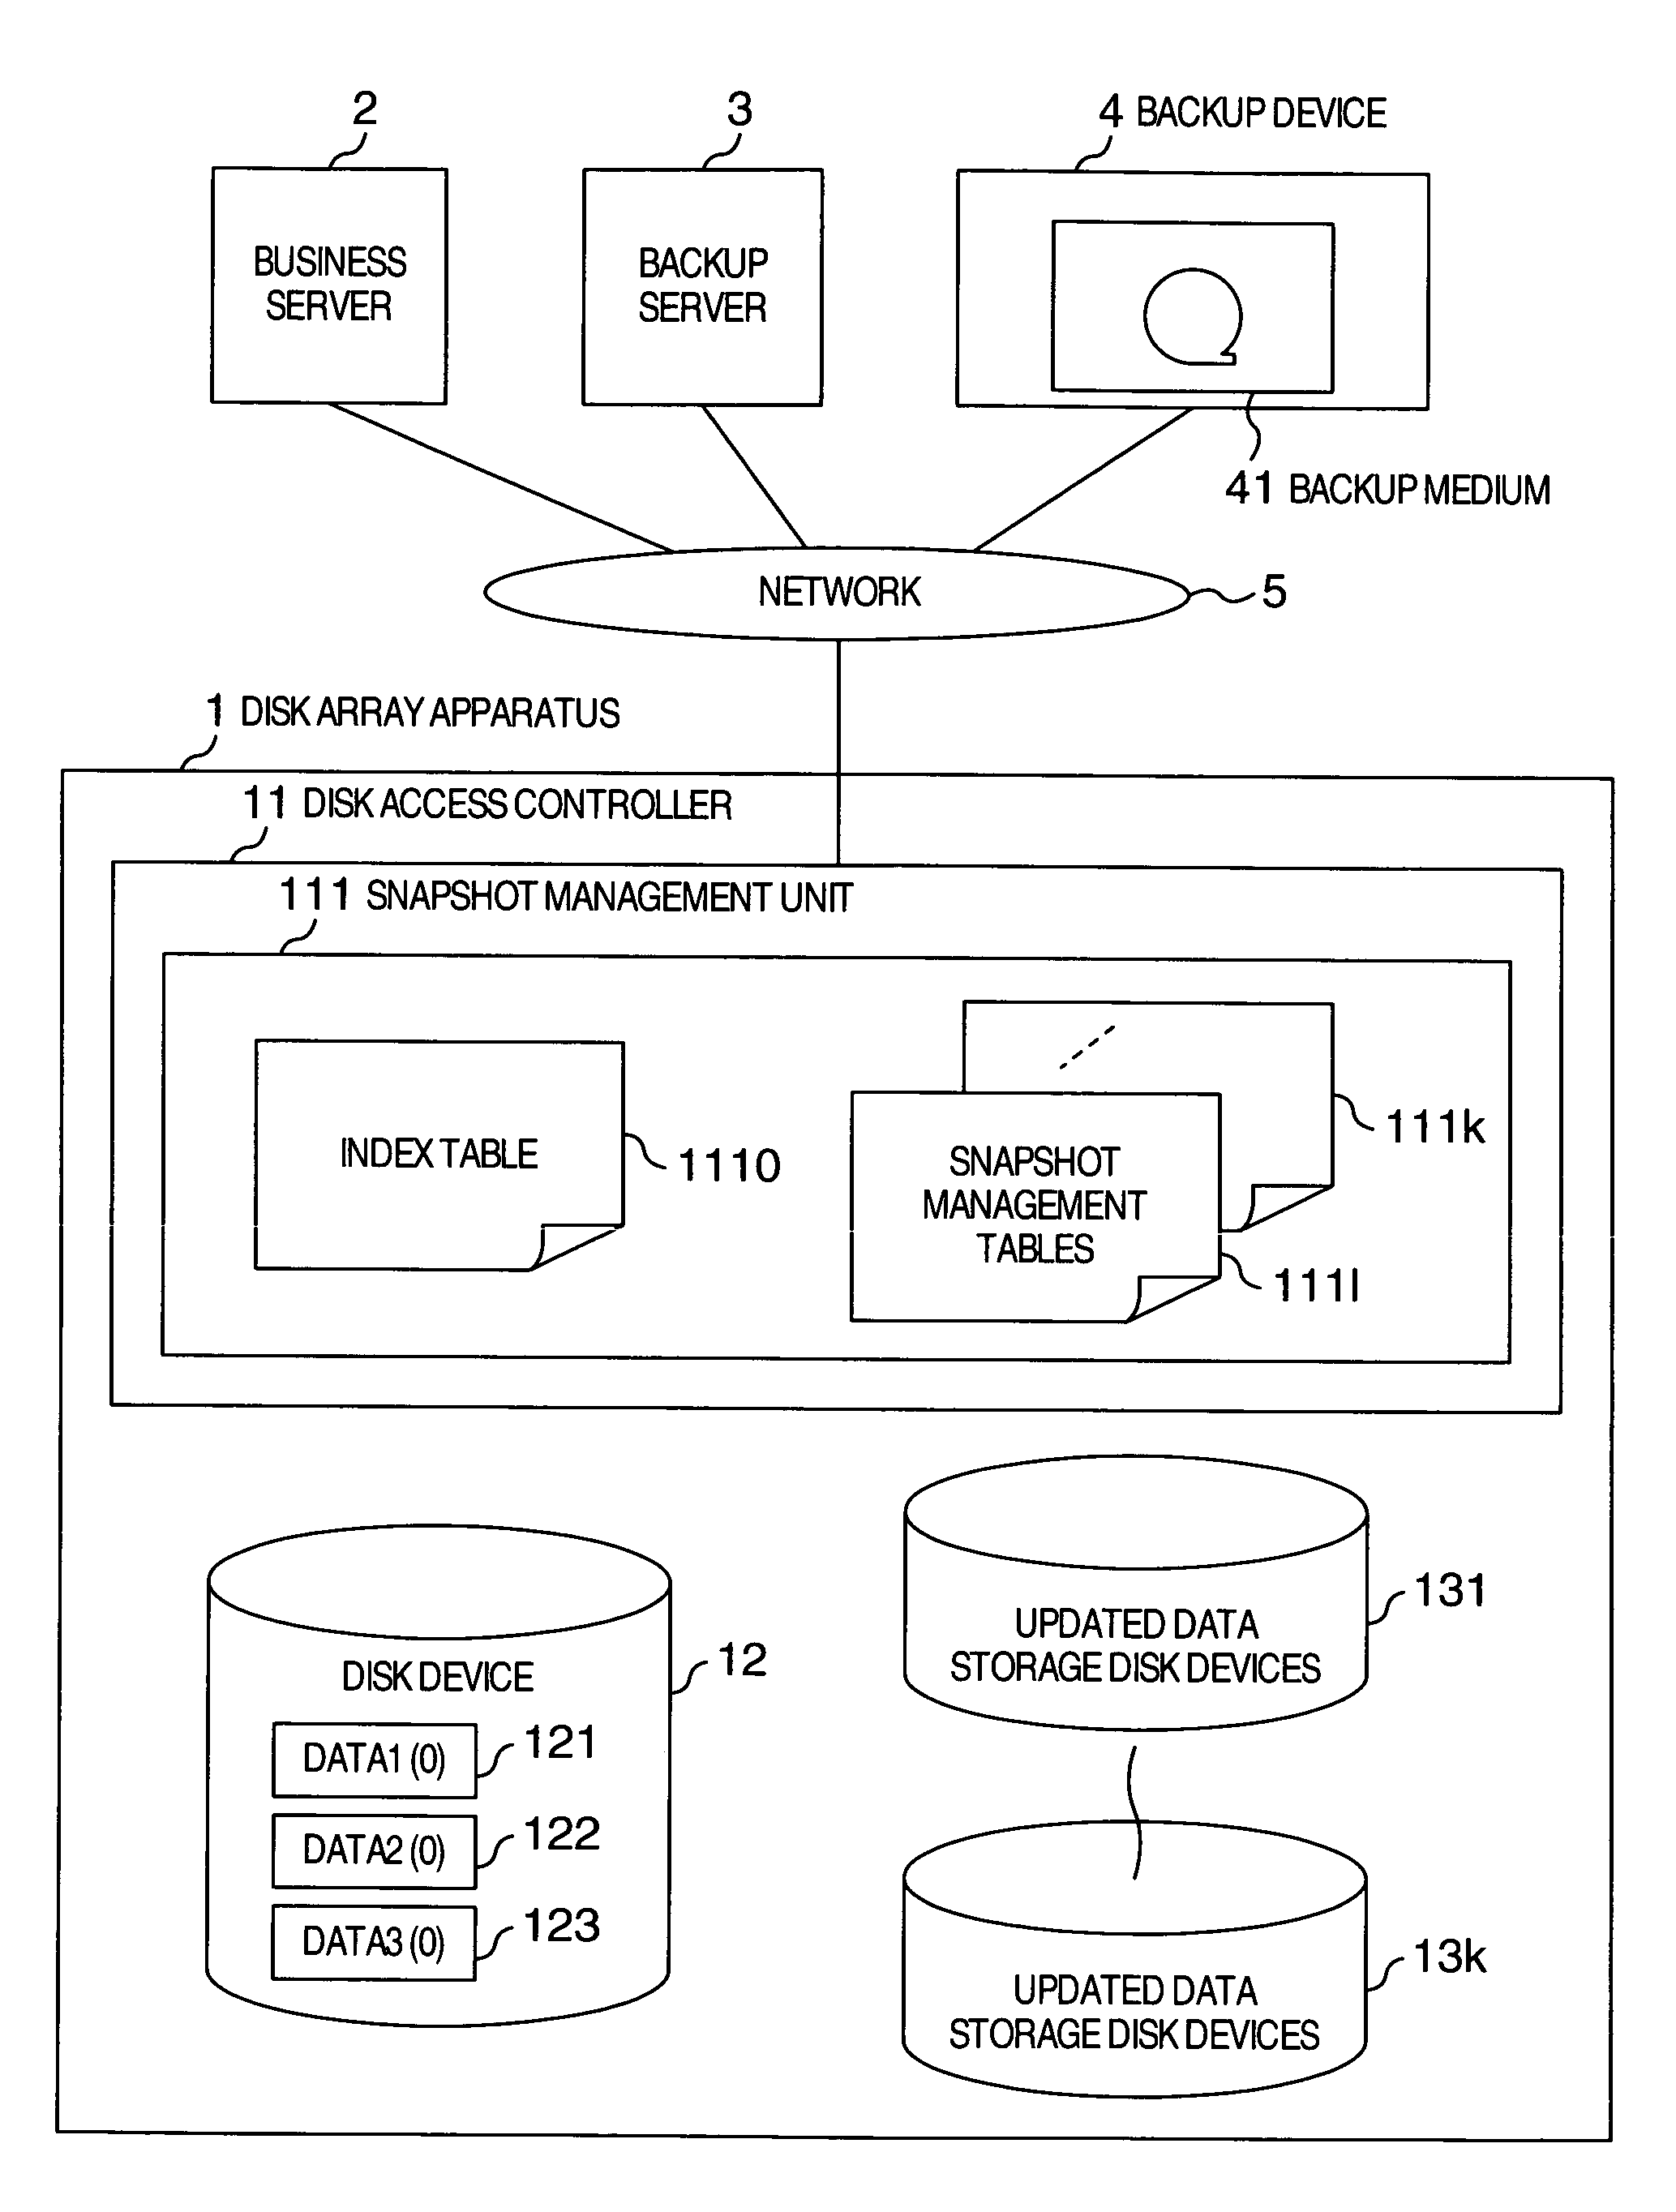 Backup acquisition method and disk array apparatus